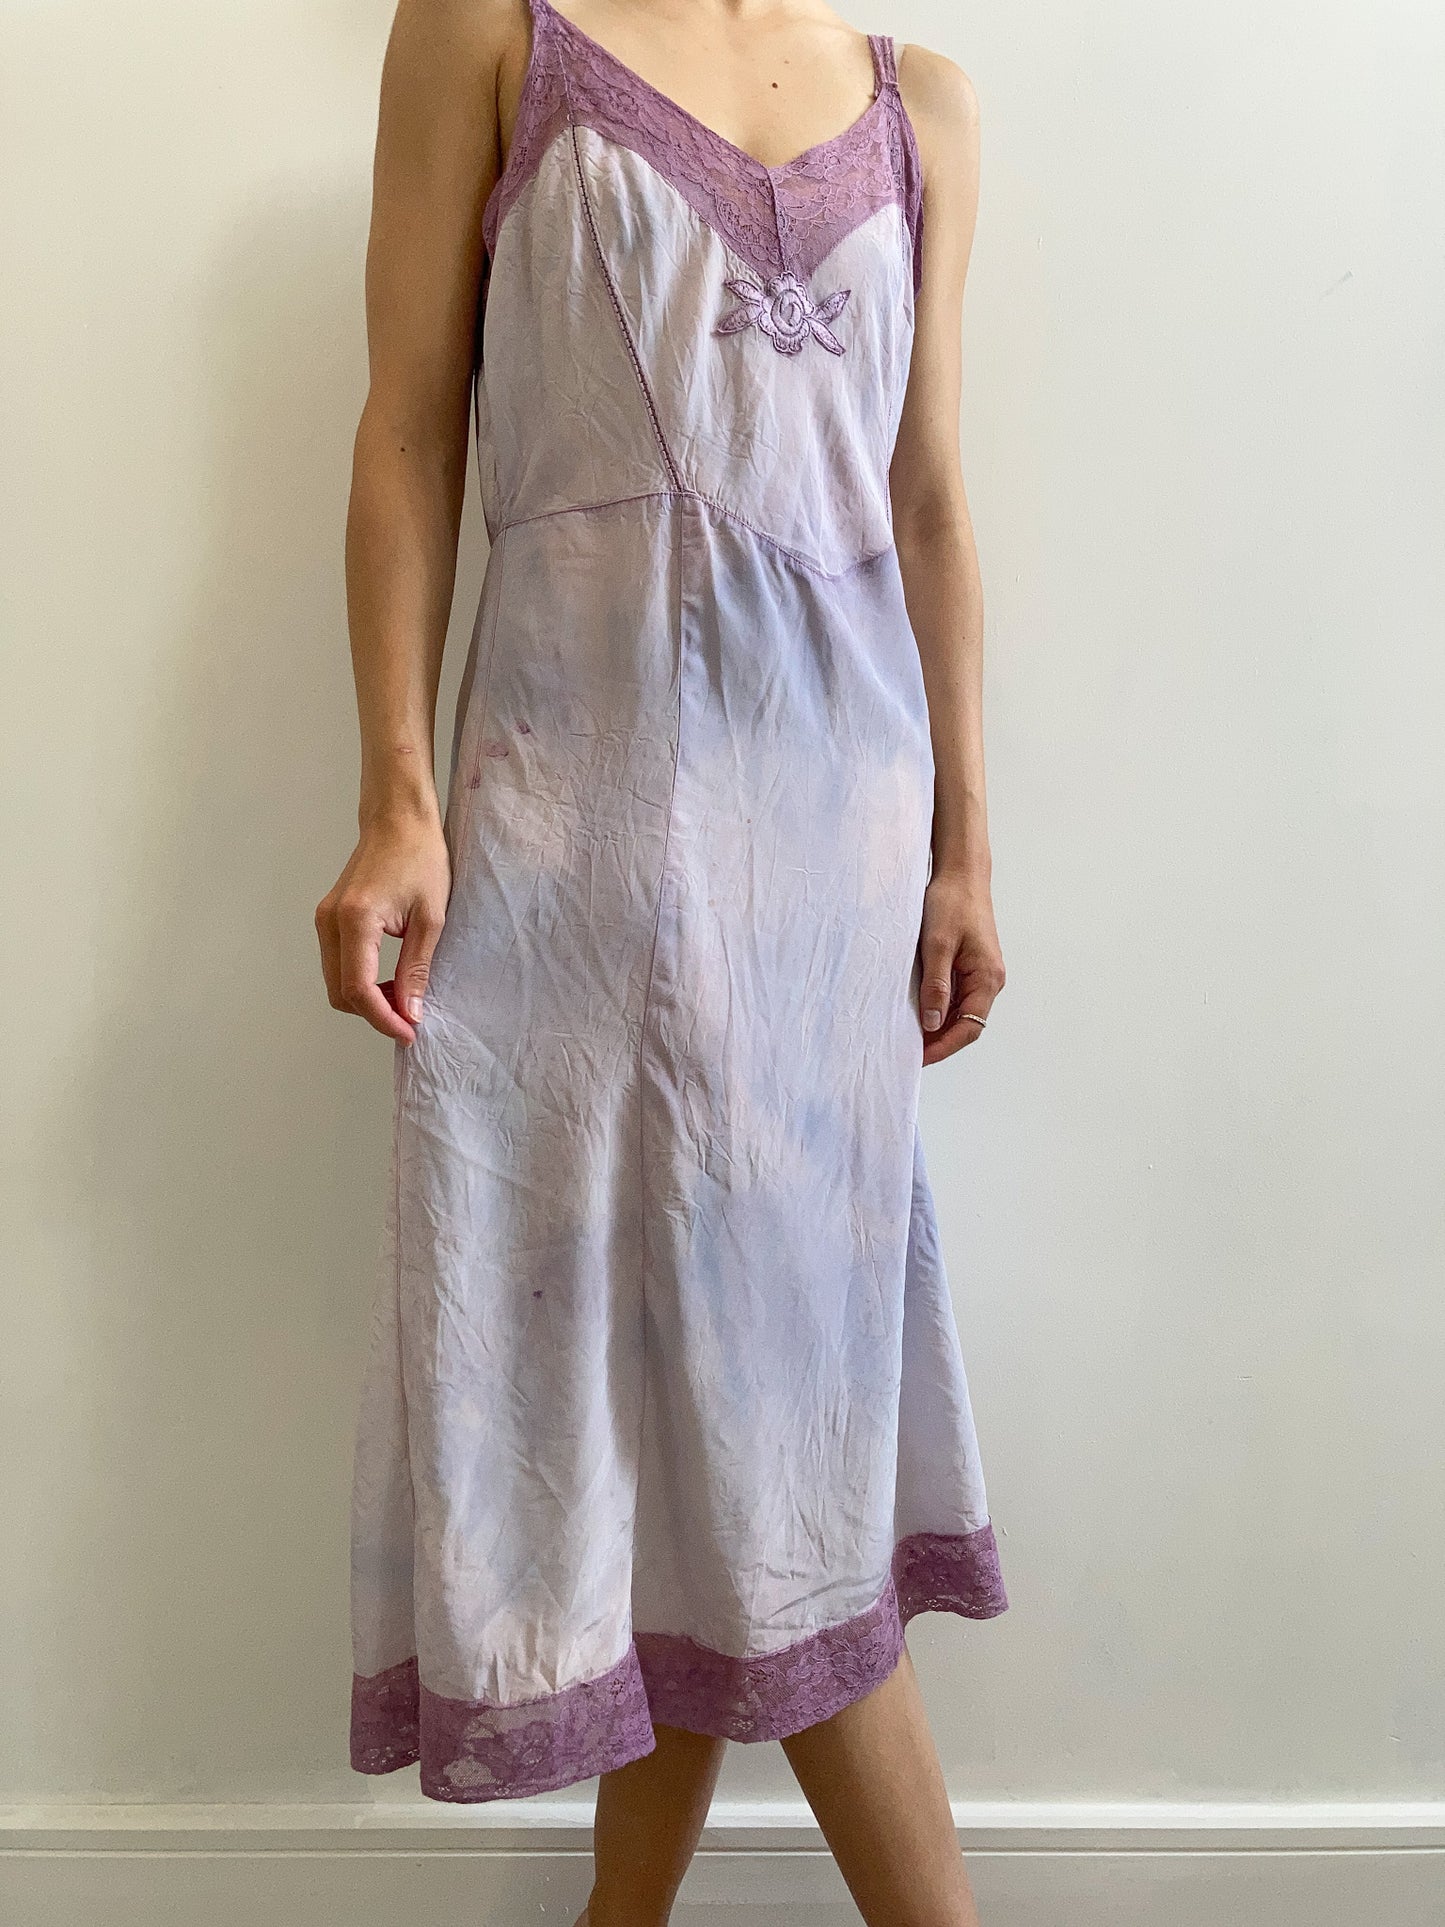 1940s Rayon & Lace Dyed Slip with Flower Applique - Lilac